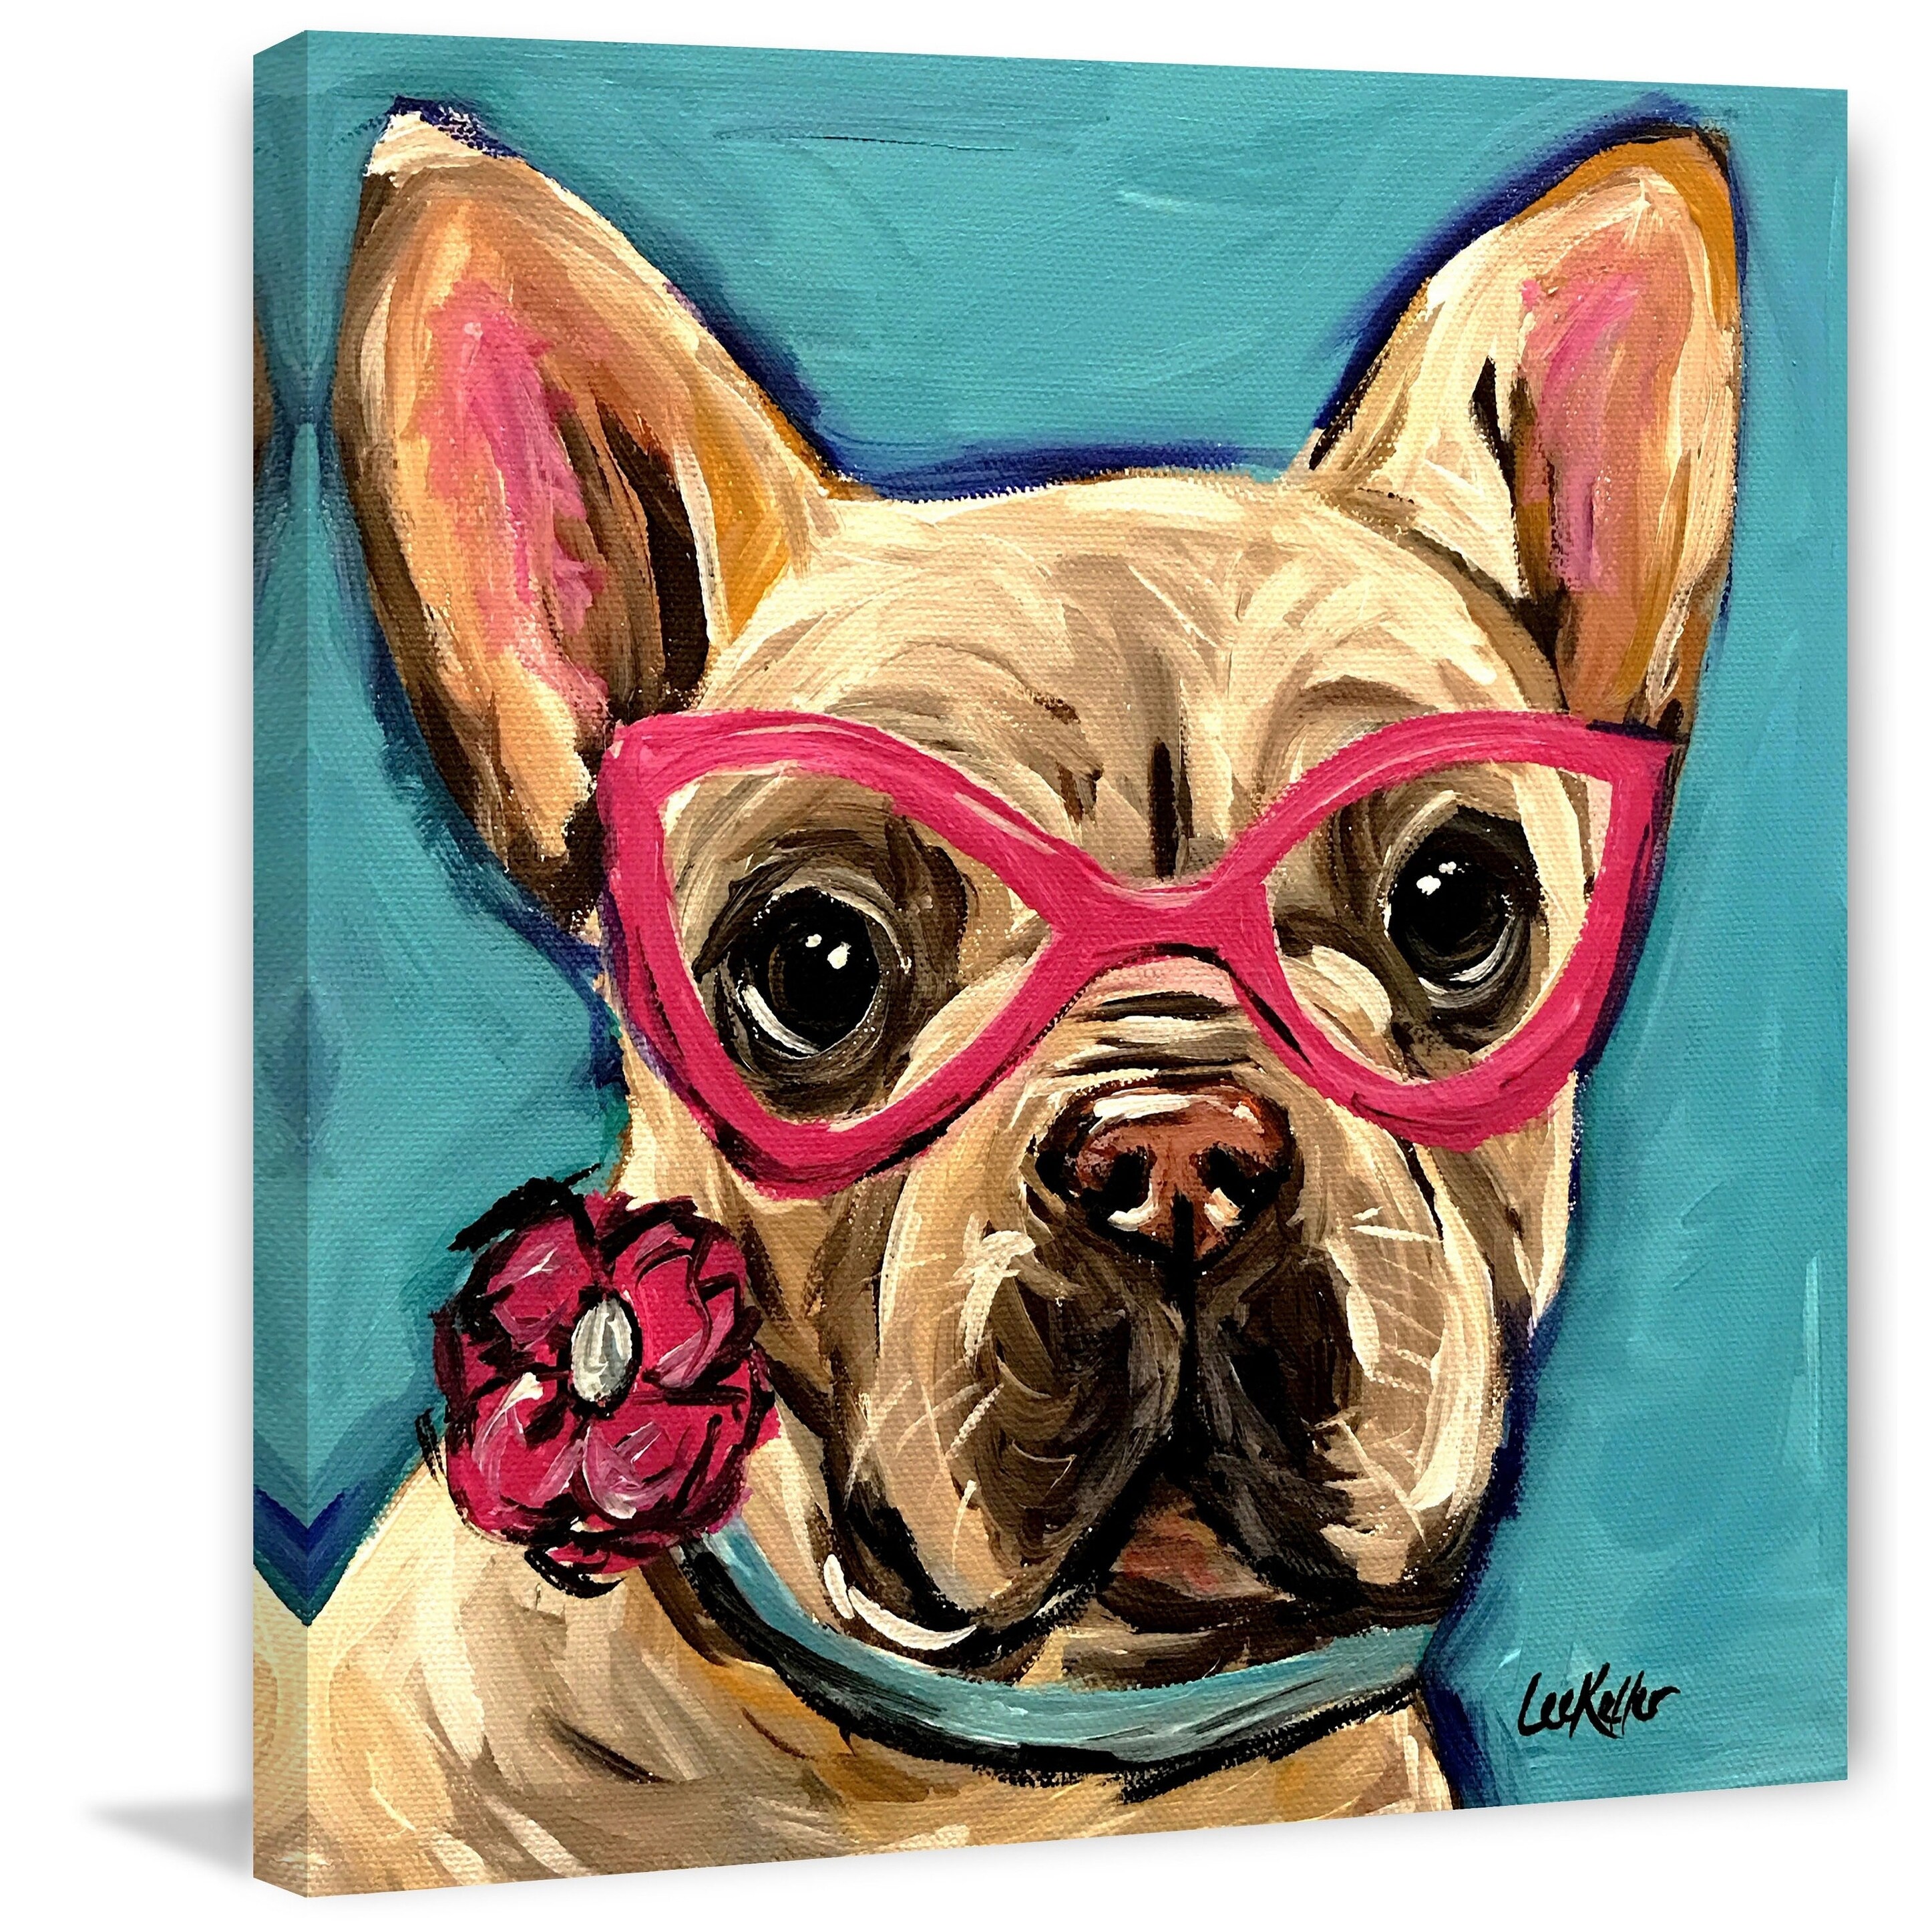 dog with glasses painting